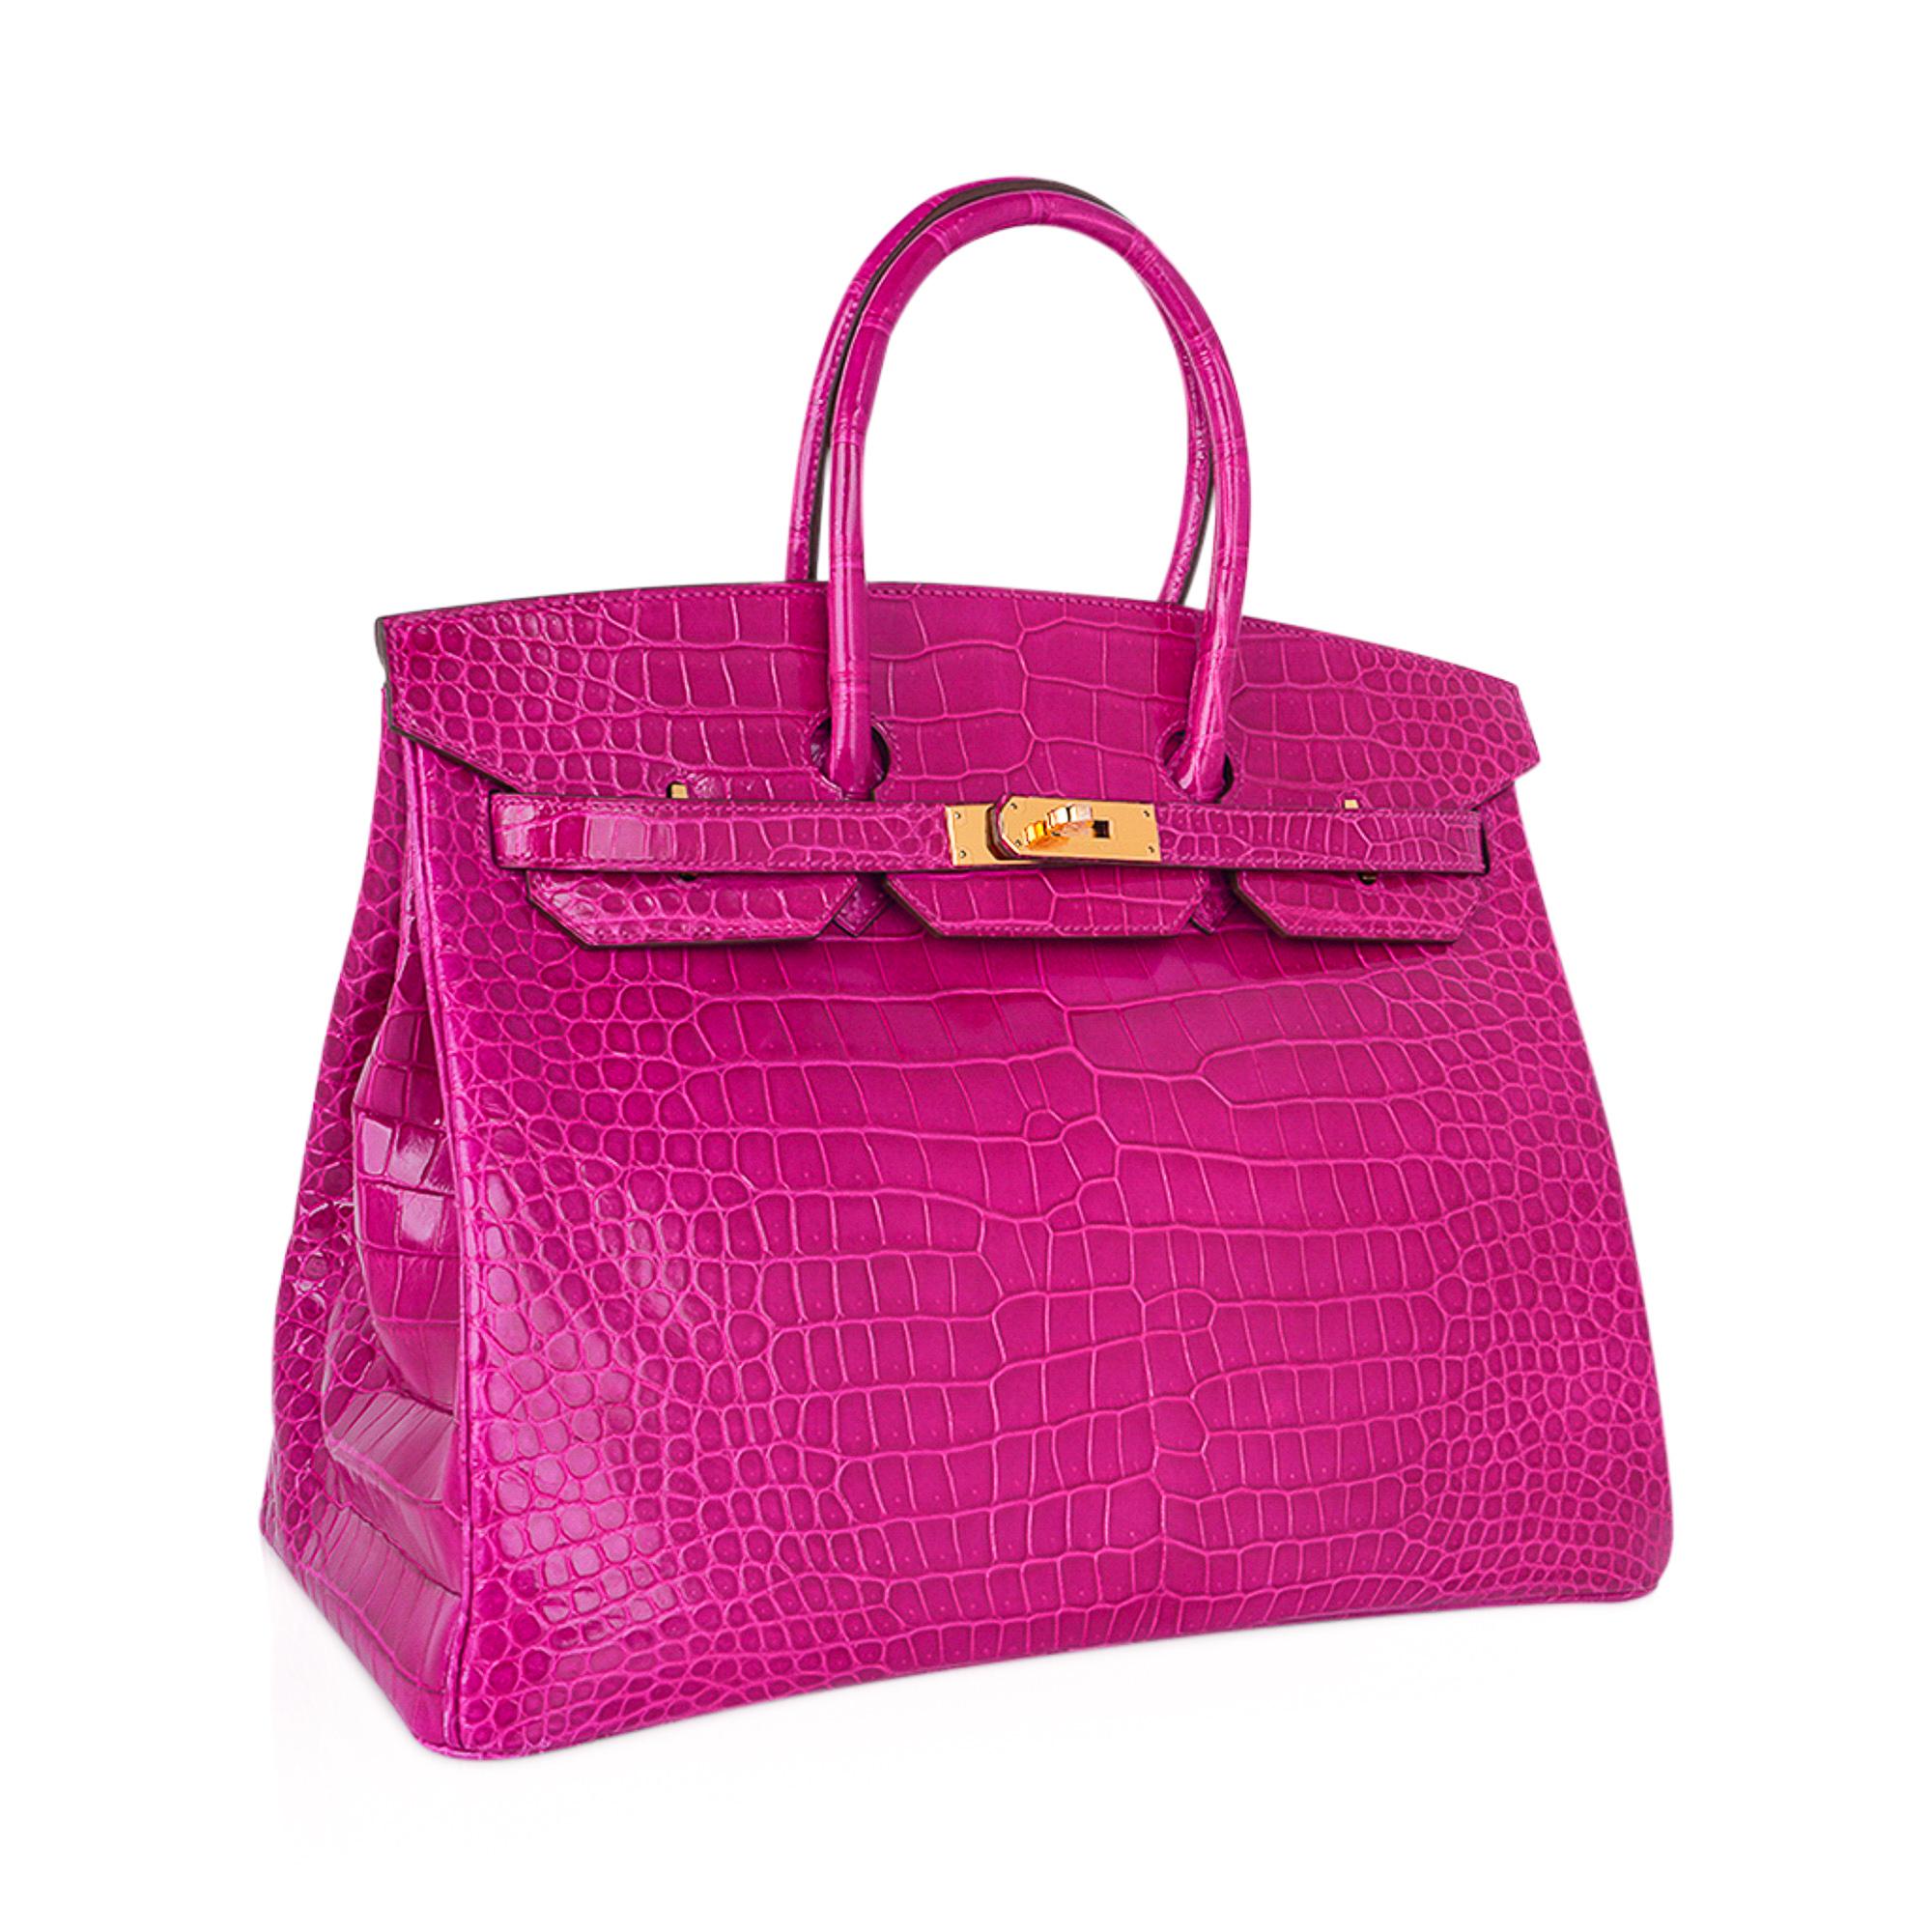 Mightychic offers an Hermes Birkin 35 Rose Scheherazade Porosus Crocodile.
This pink crocodile Birkin bag is breathtaking in its depth of color and beauty of scales.
Rich with gold Birkin bag hardware this genuine crocodile skin bag is a